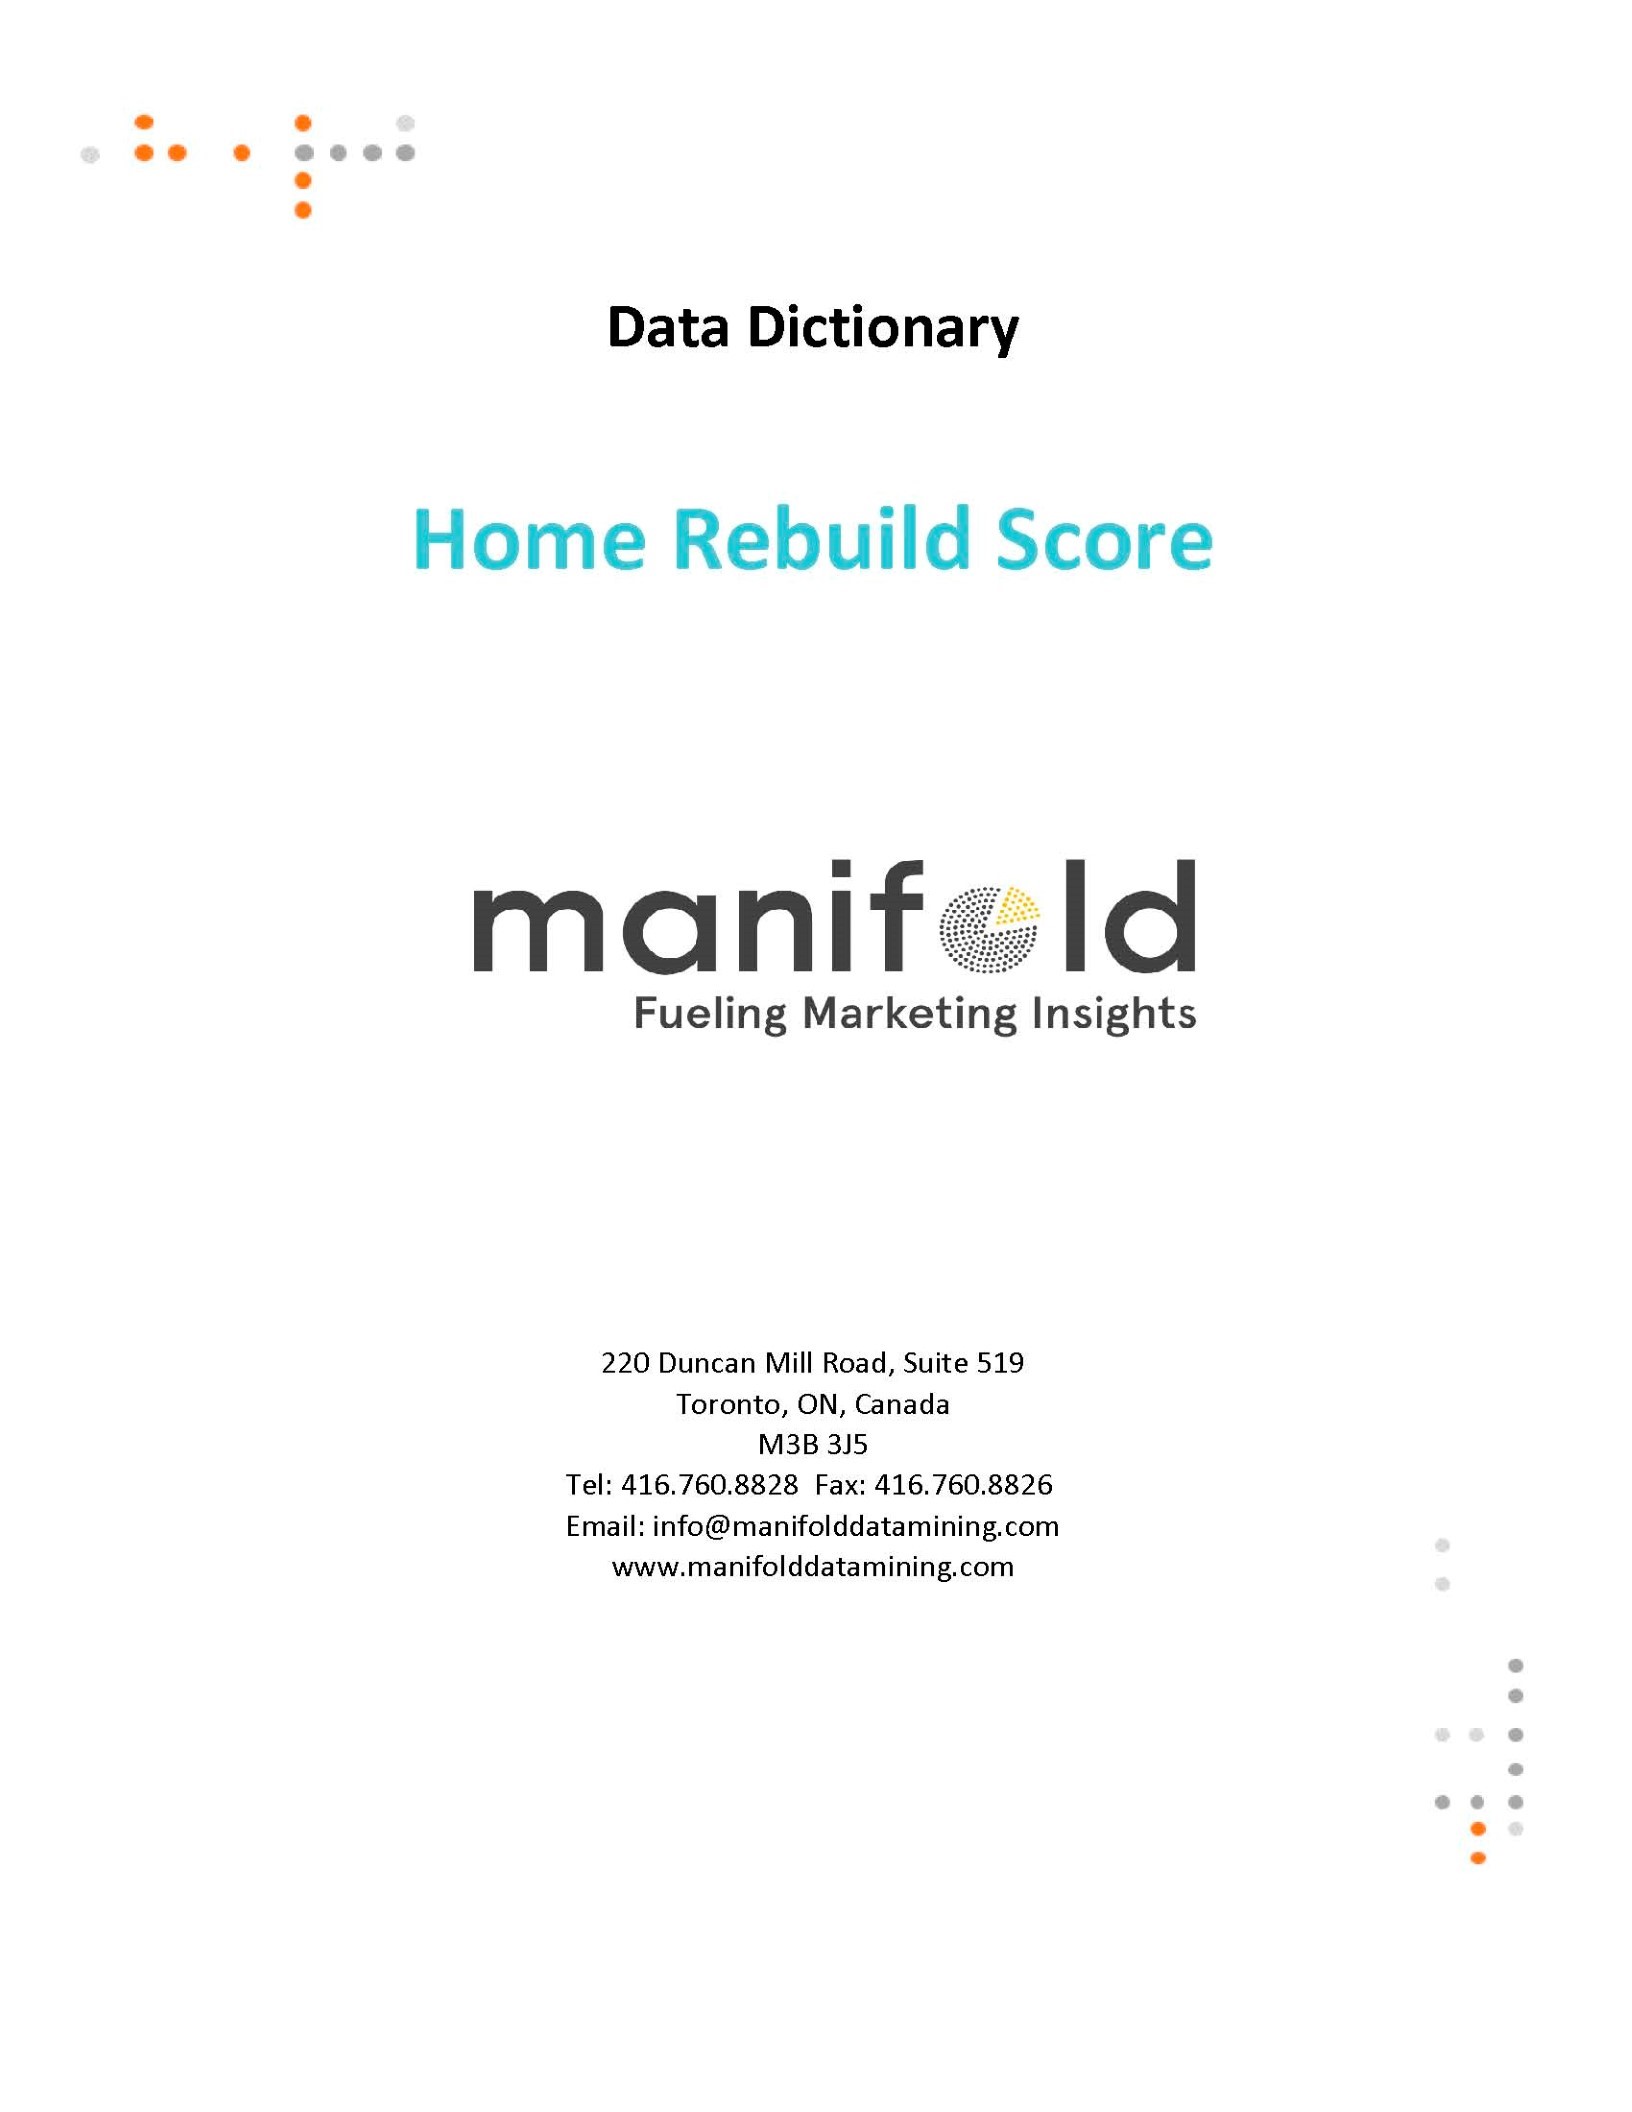 Data Dictionary of Home Rebuild Score_Page_1